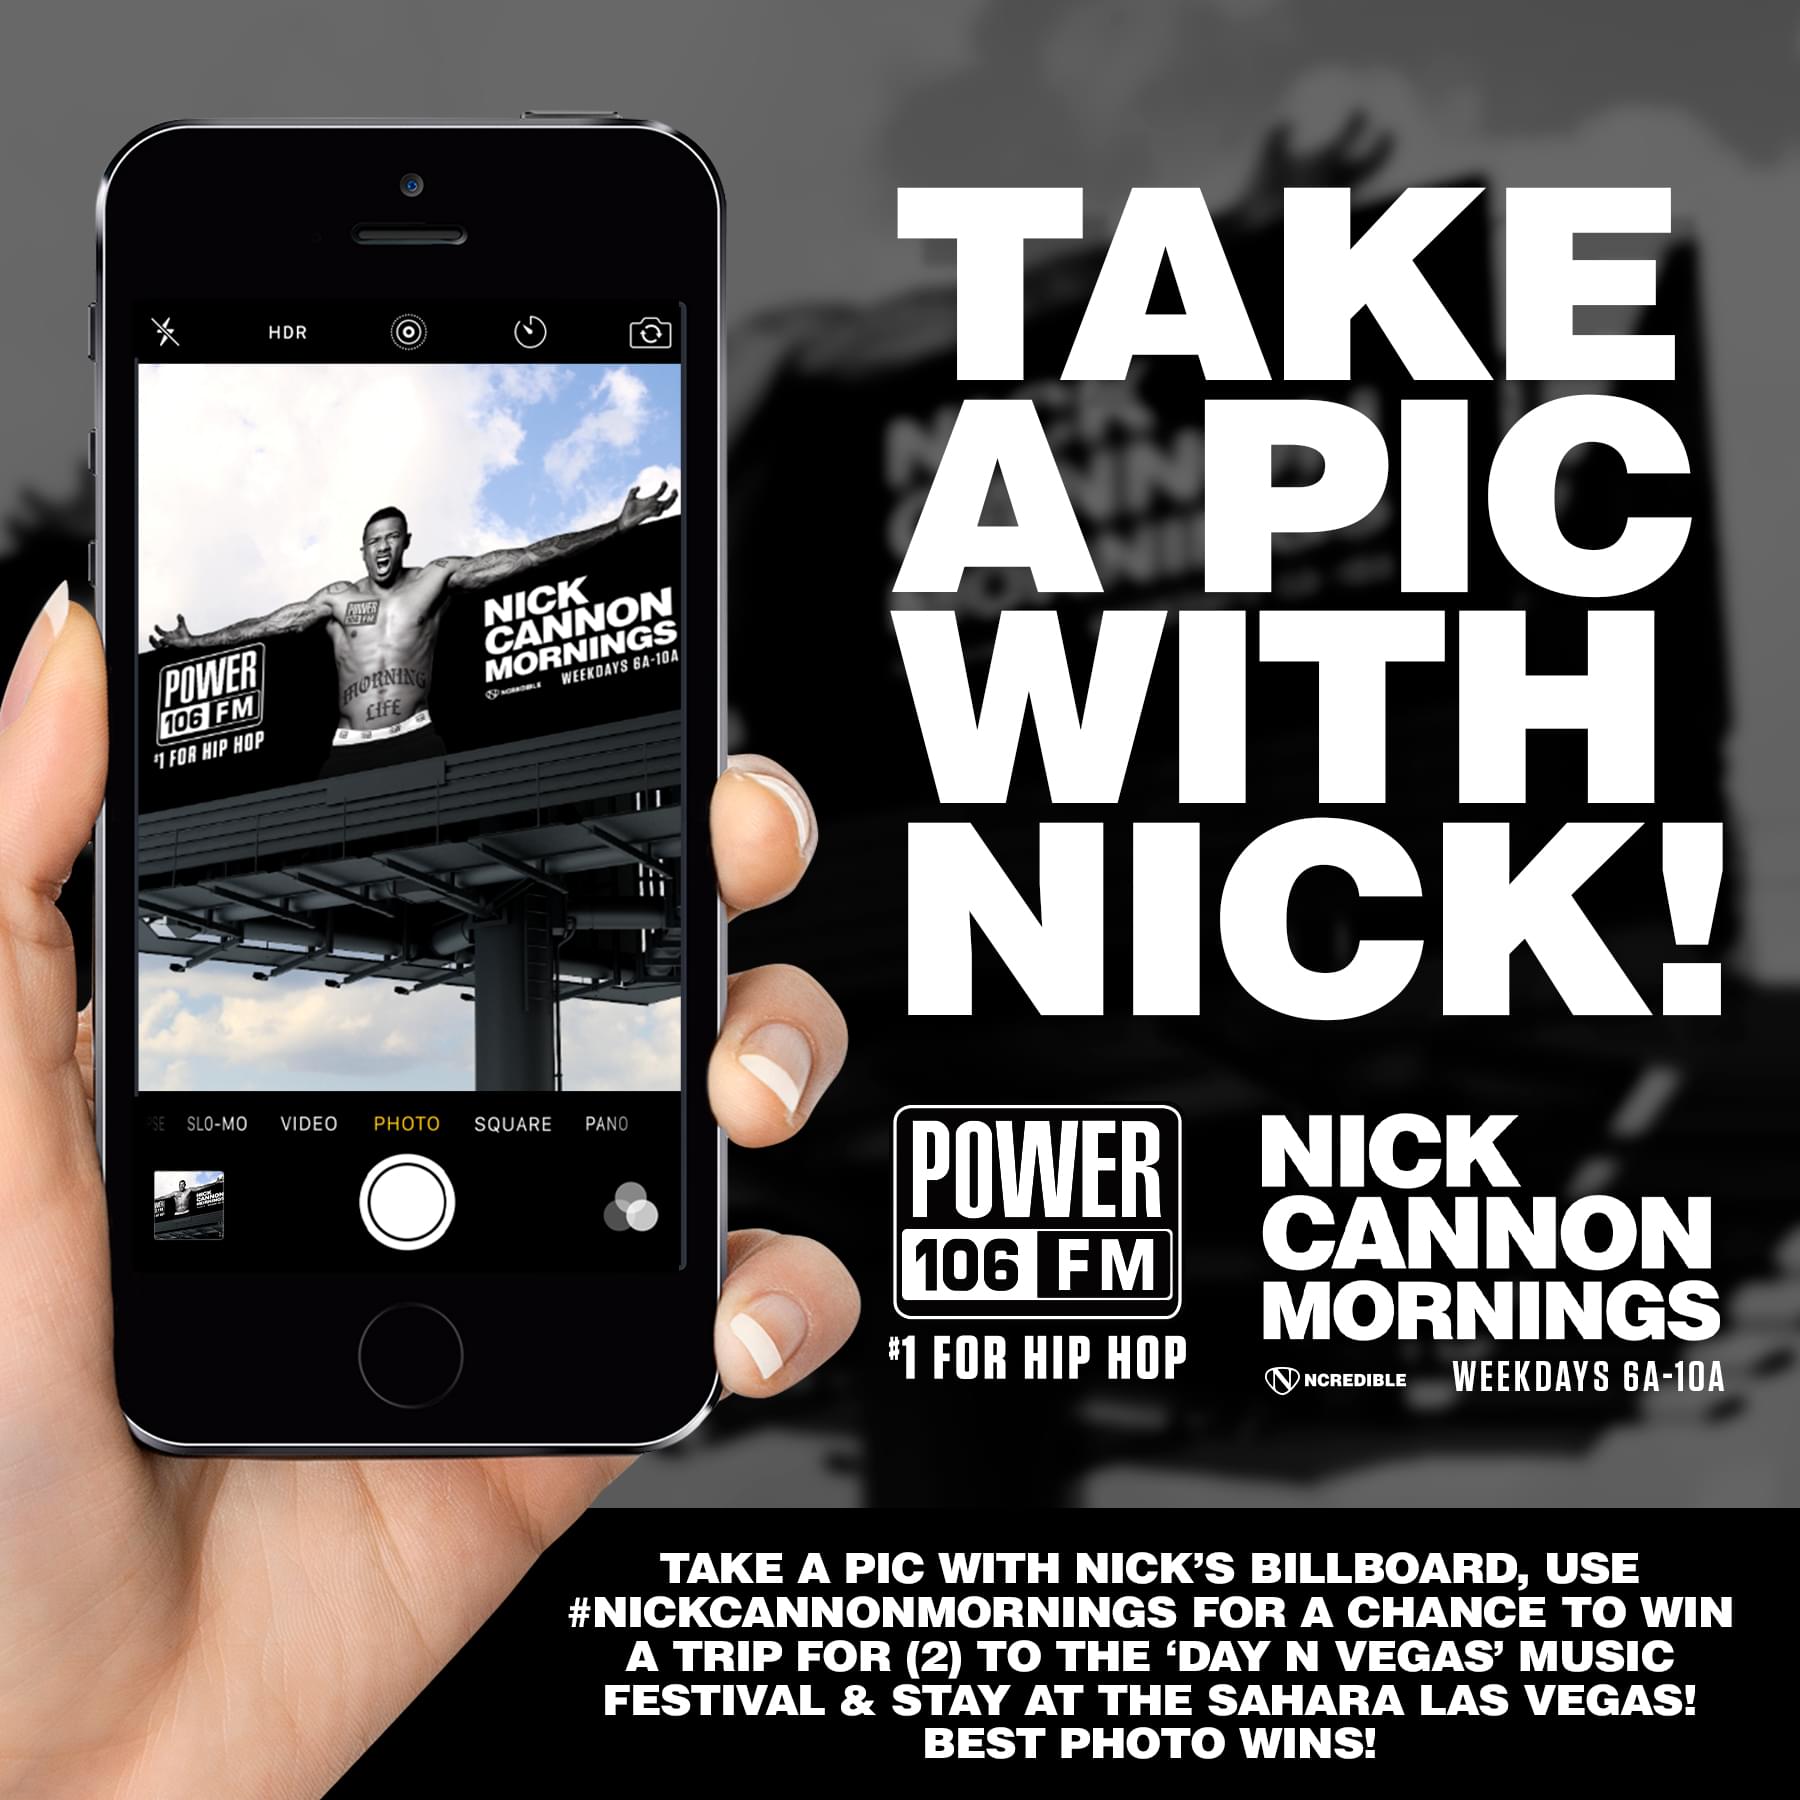 Post a picture of you in front of any Nick Cannon billboard and #NickCannonMornings 